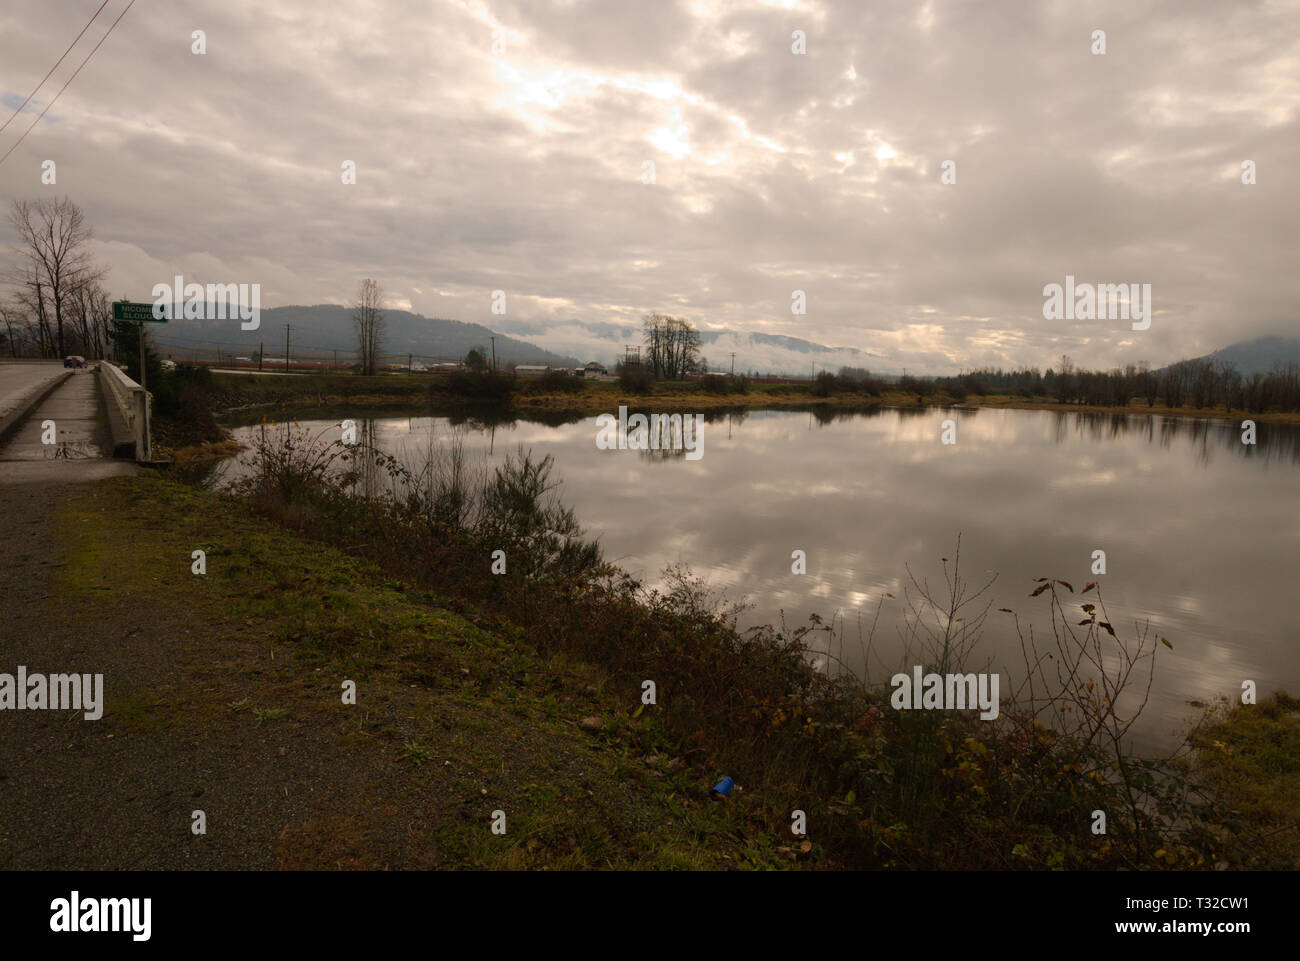 A placid backwater of the Vedder River reflects a turbulent gray overcast sky in Chilliwack, British Columbia, Canada Stock Photo